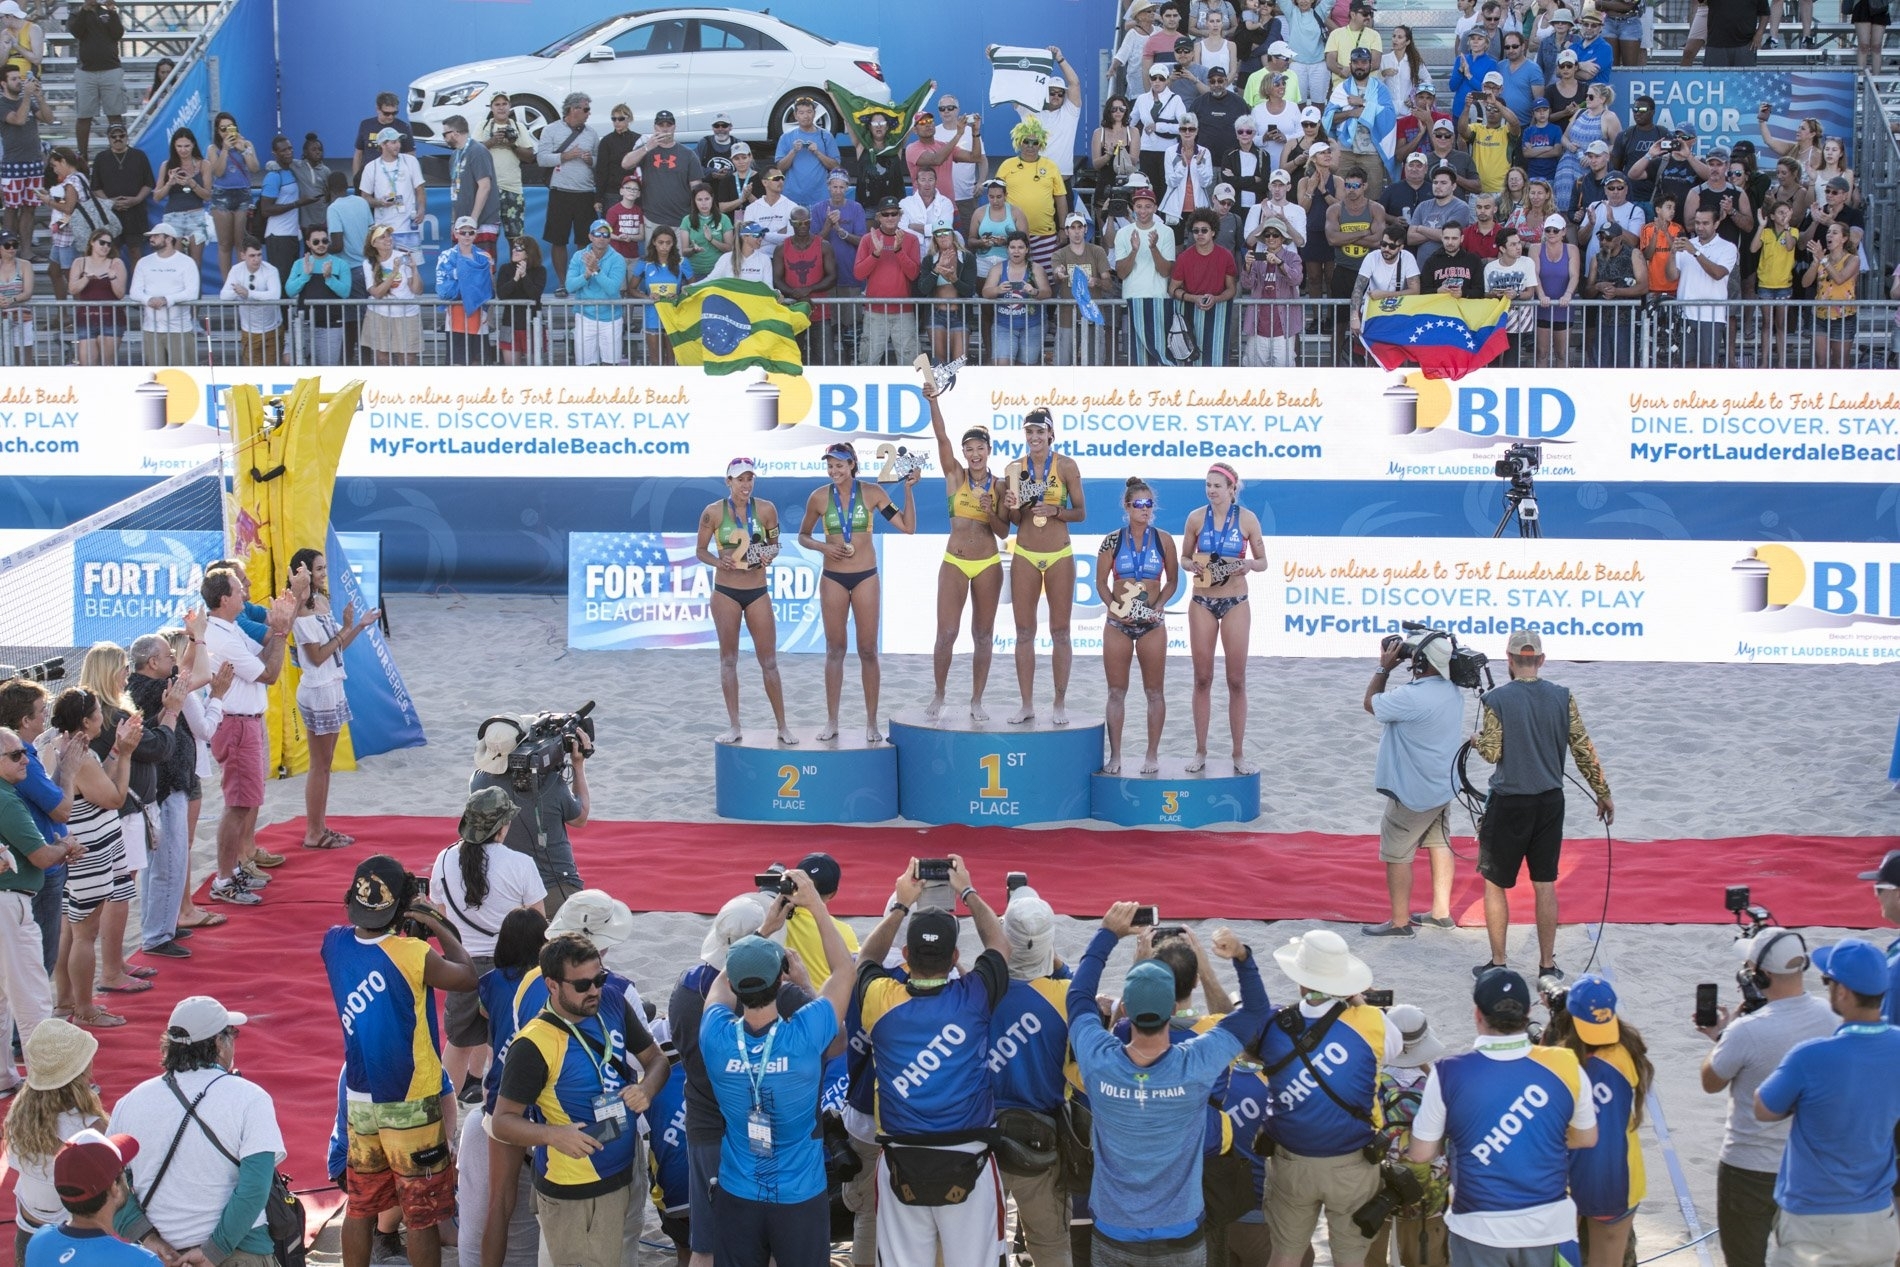 In Fort Lauderdale in March, the women's podium saw two Brazilian teams and one from the US take the medals